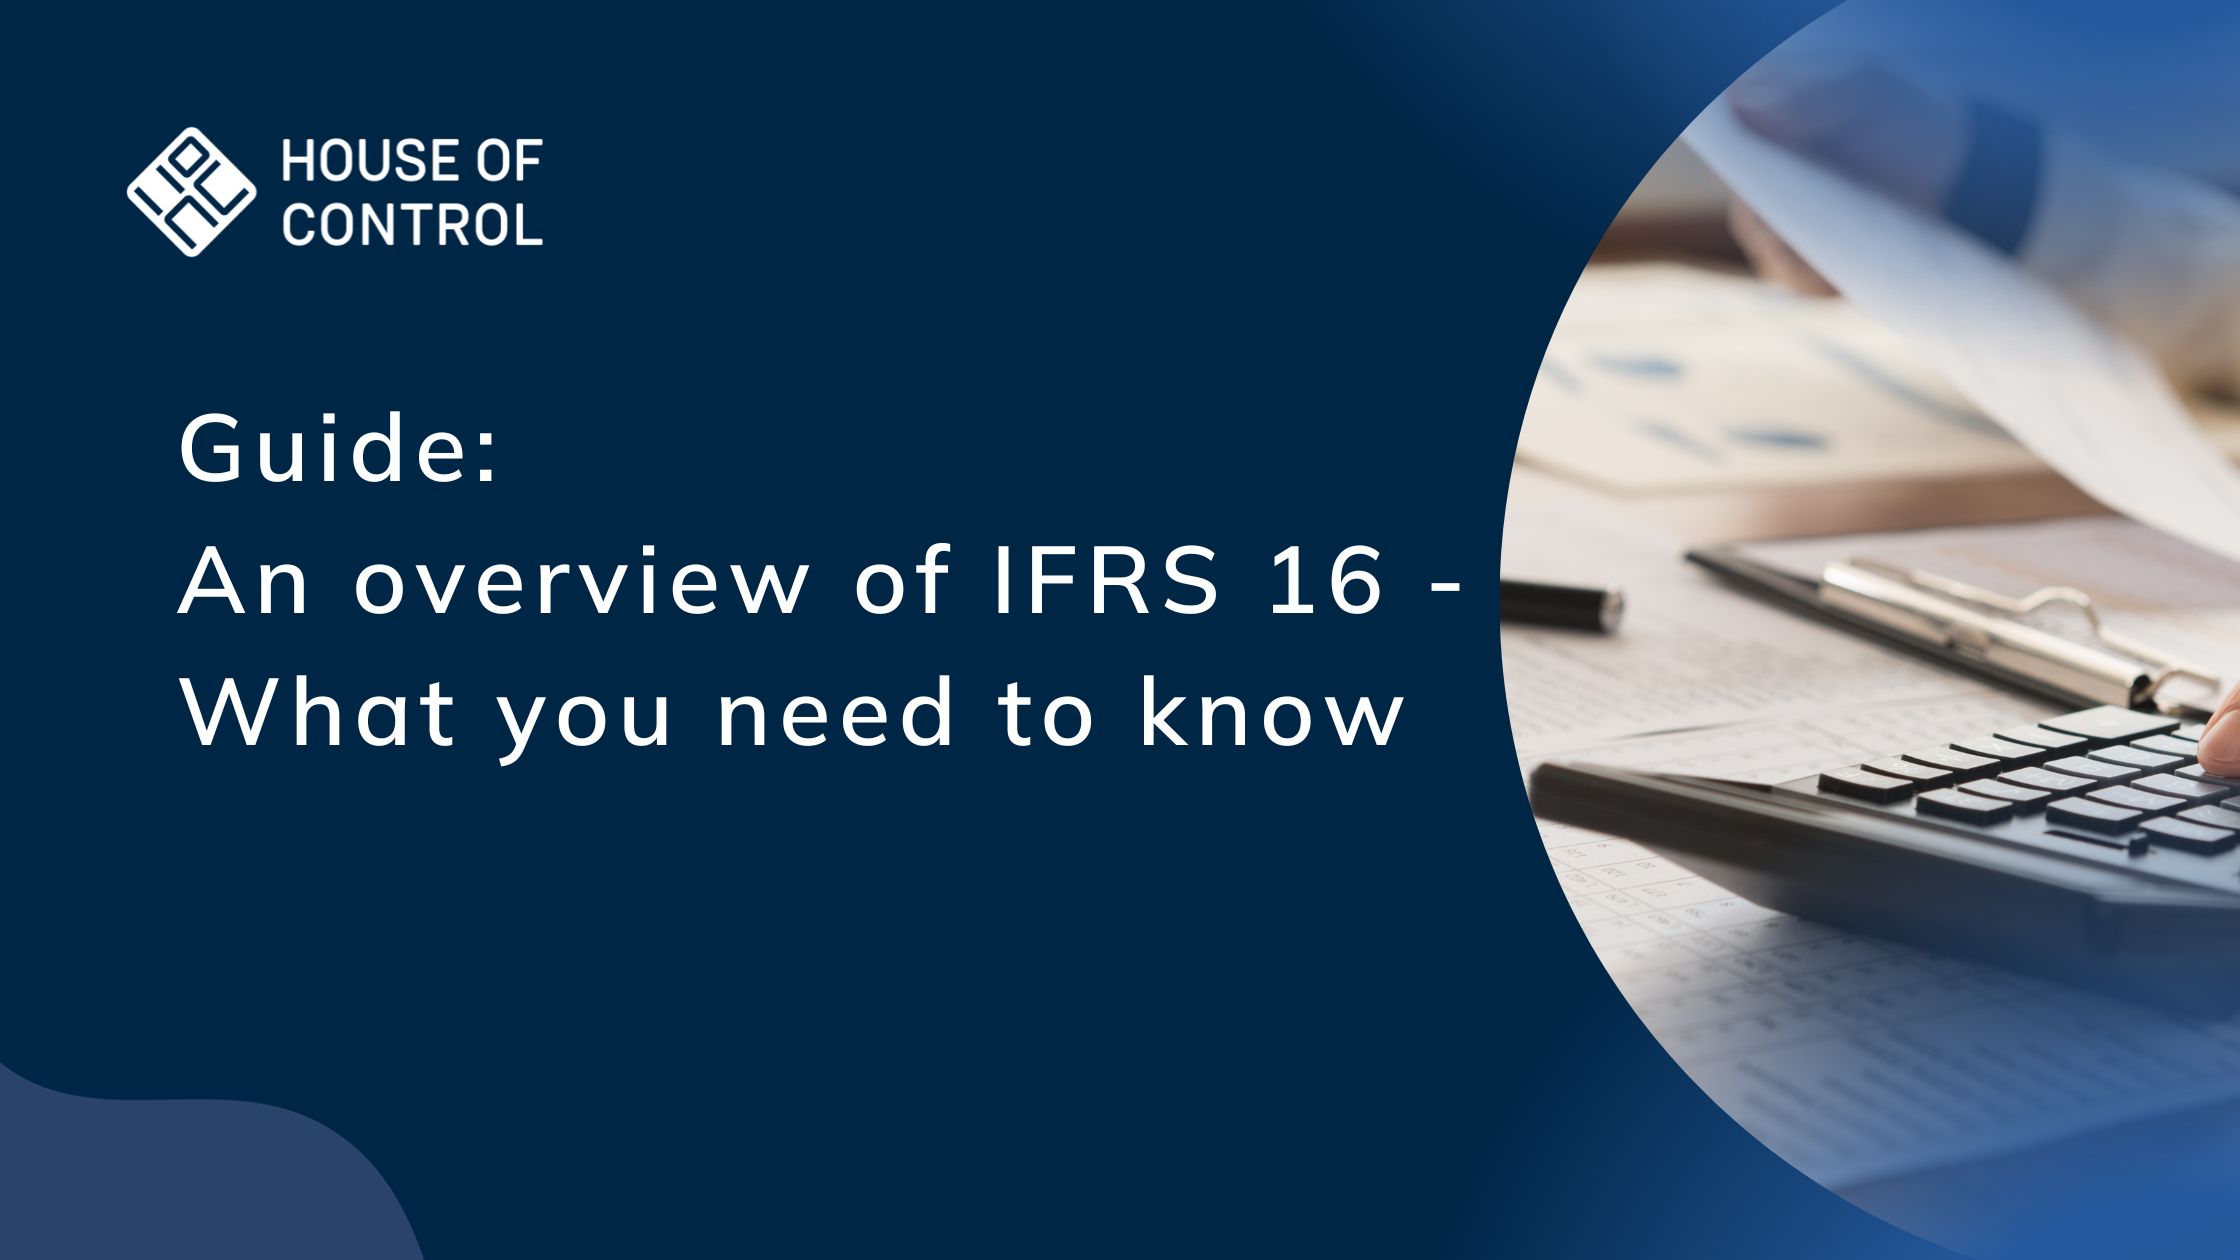 Guide An overview of IFRS 16 - What you need to know (1)